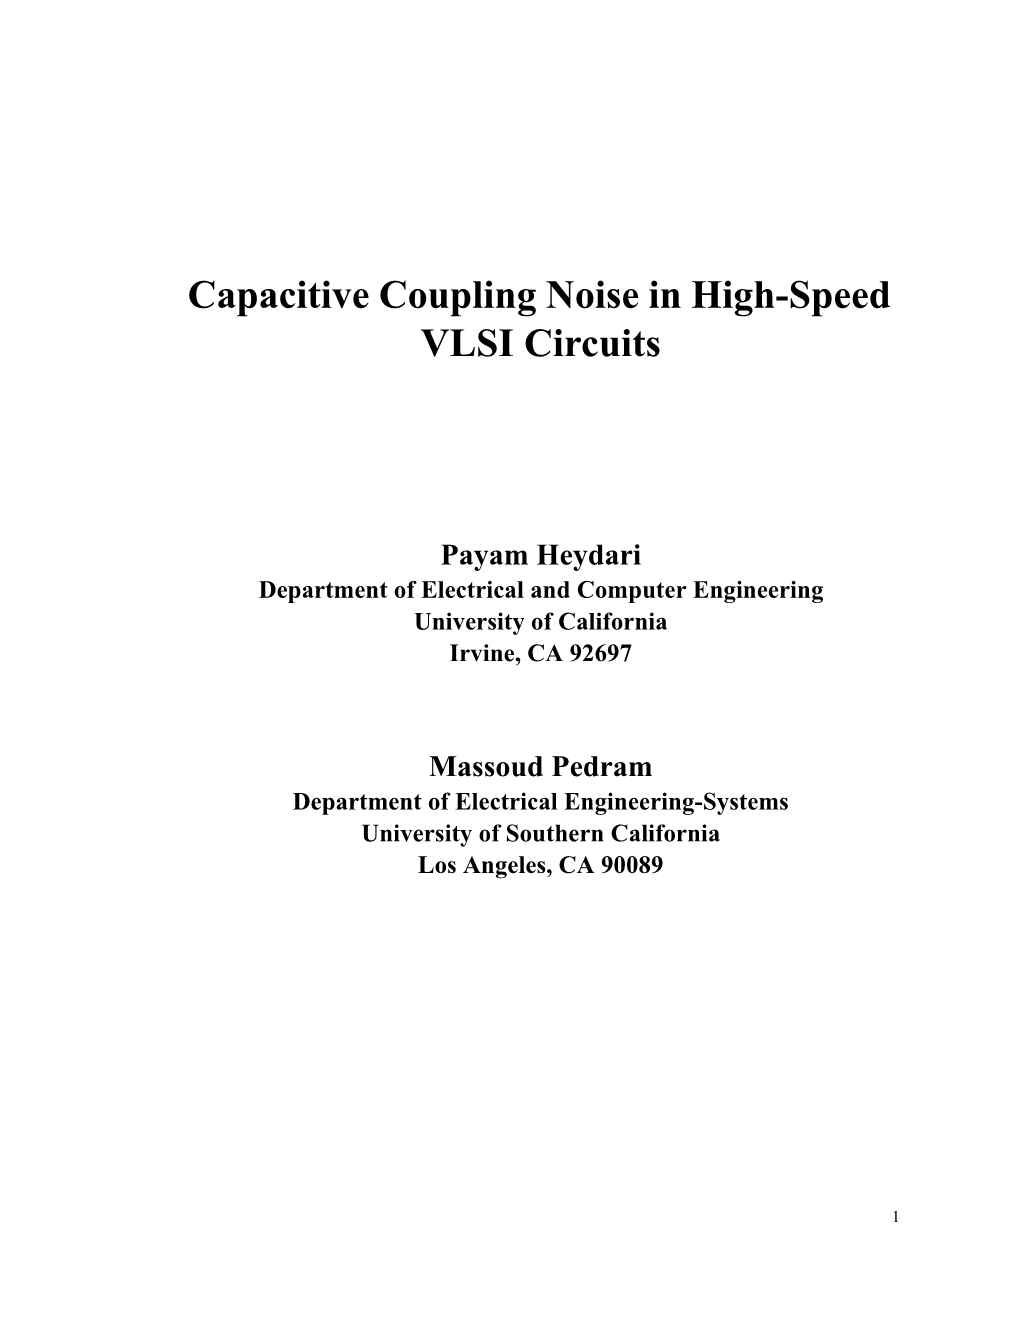 Capacitive Coupling Noise in High-Speed VLSI Circuits